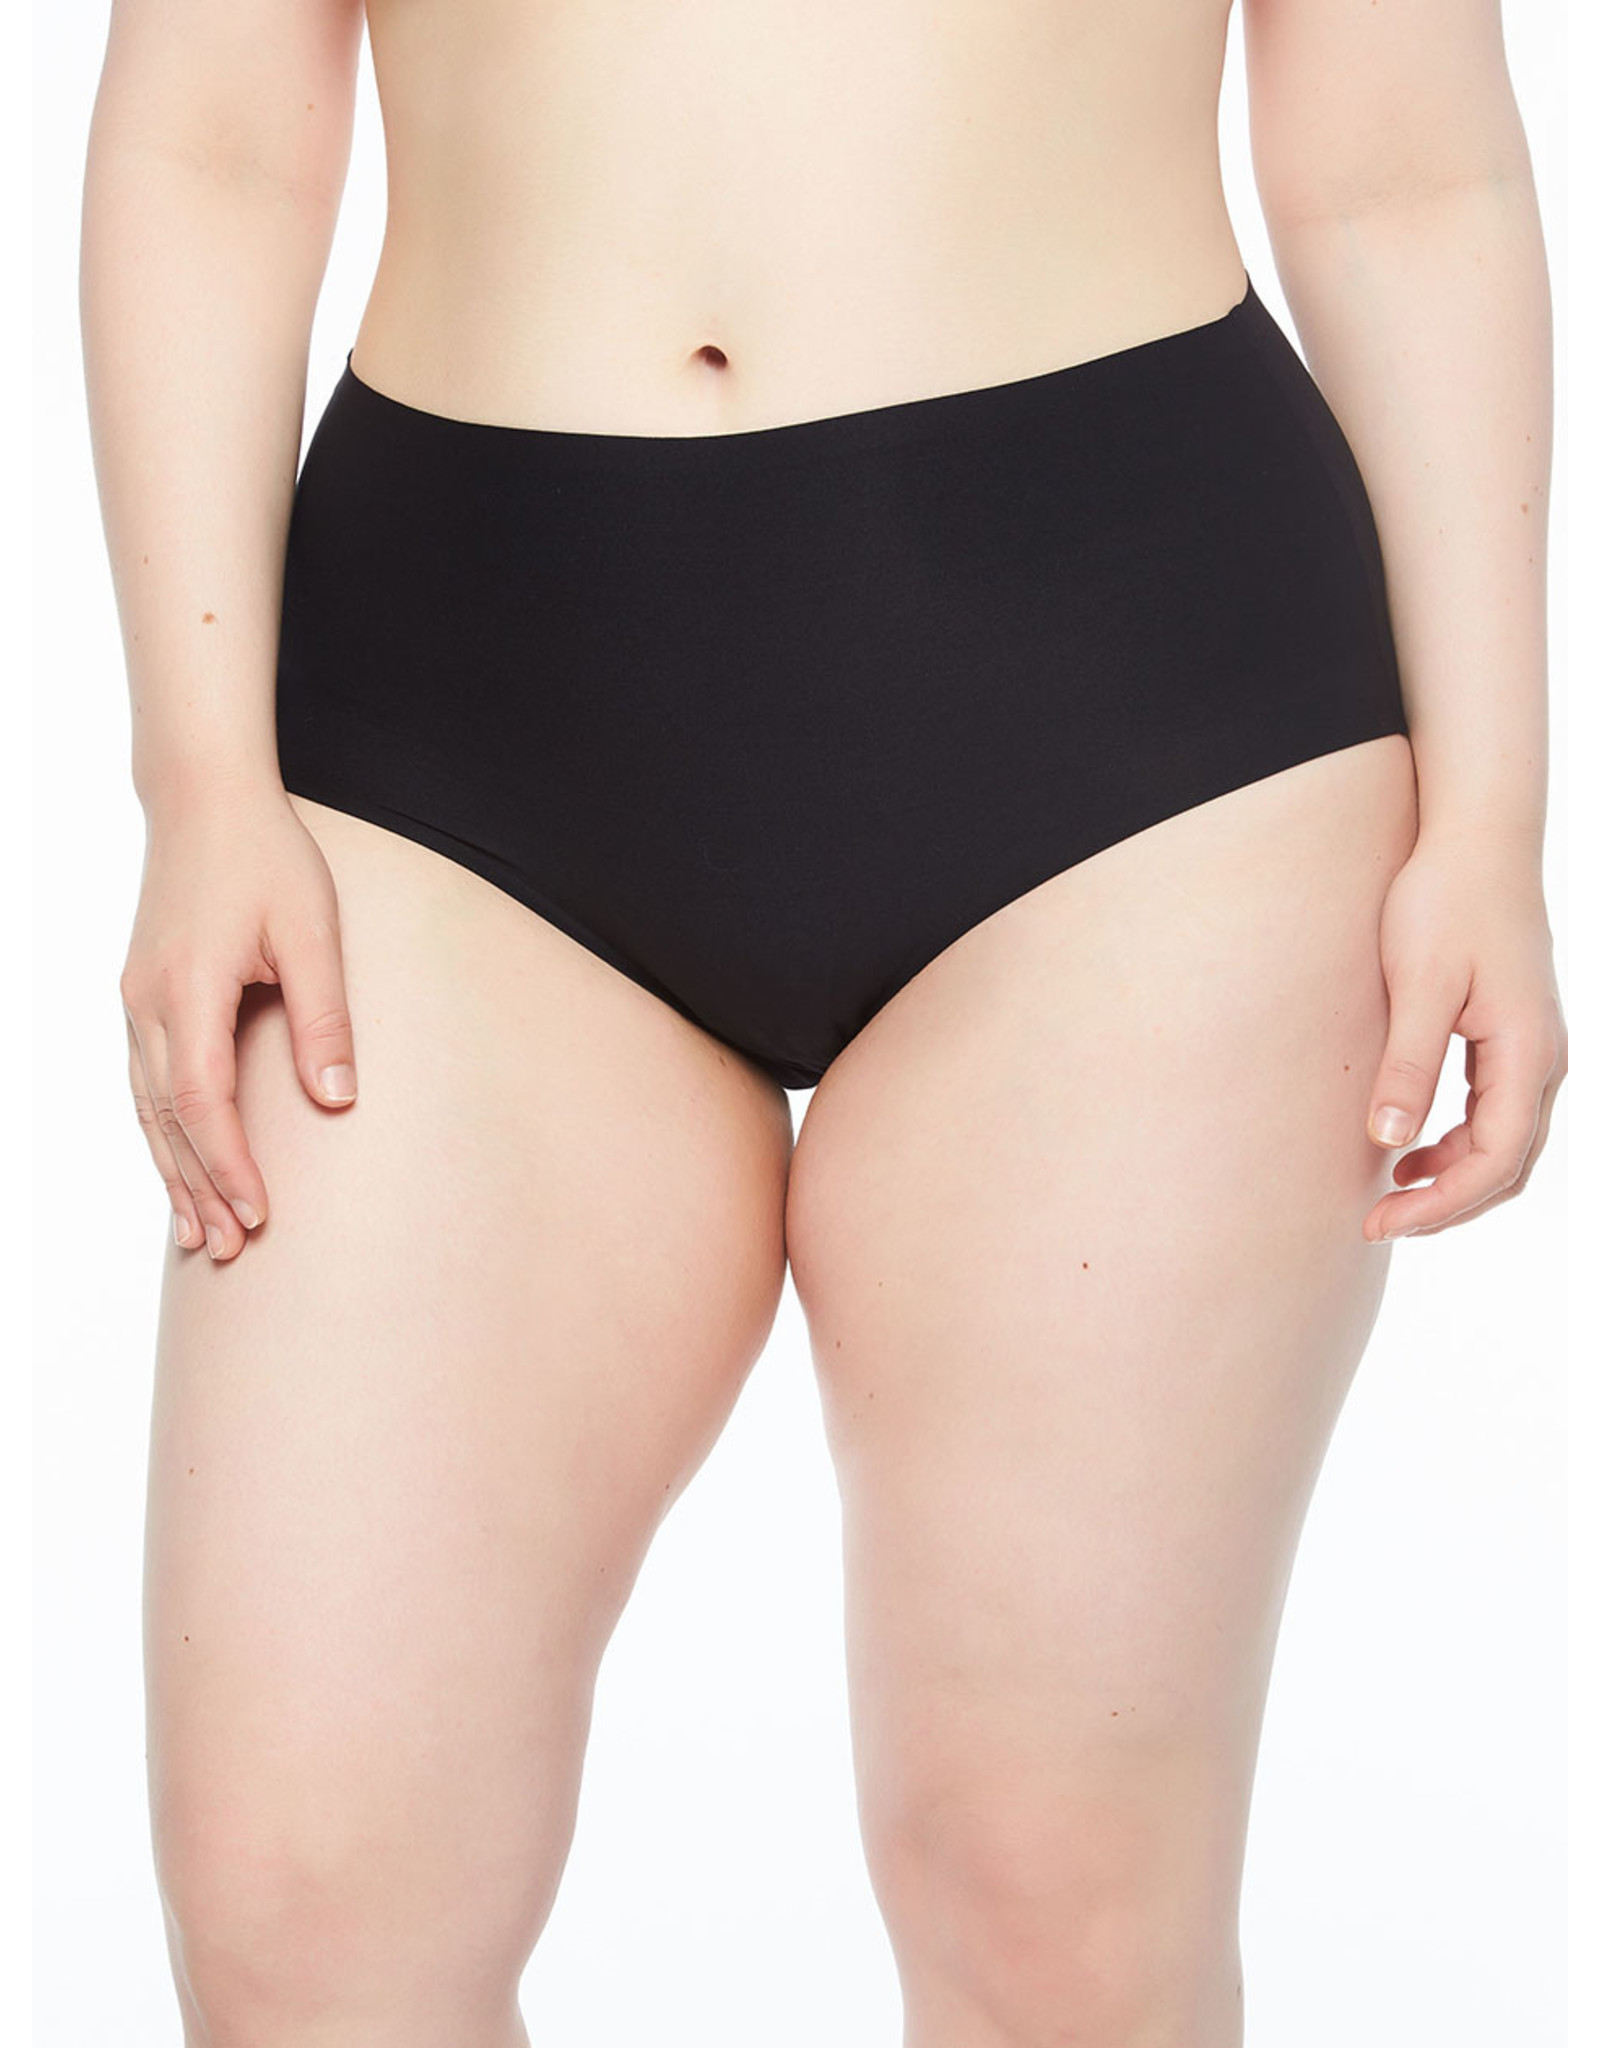 Chantelle SoftStretch Plus Size Full Brief